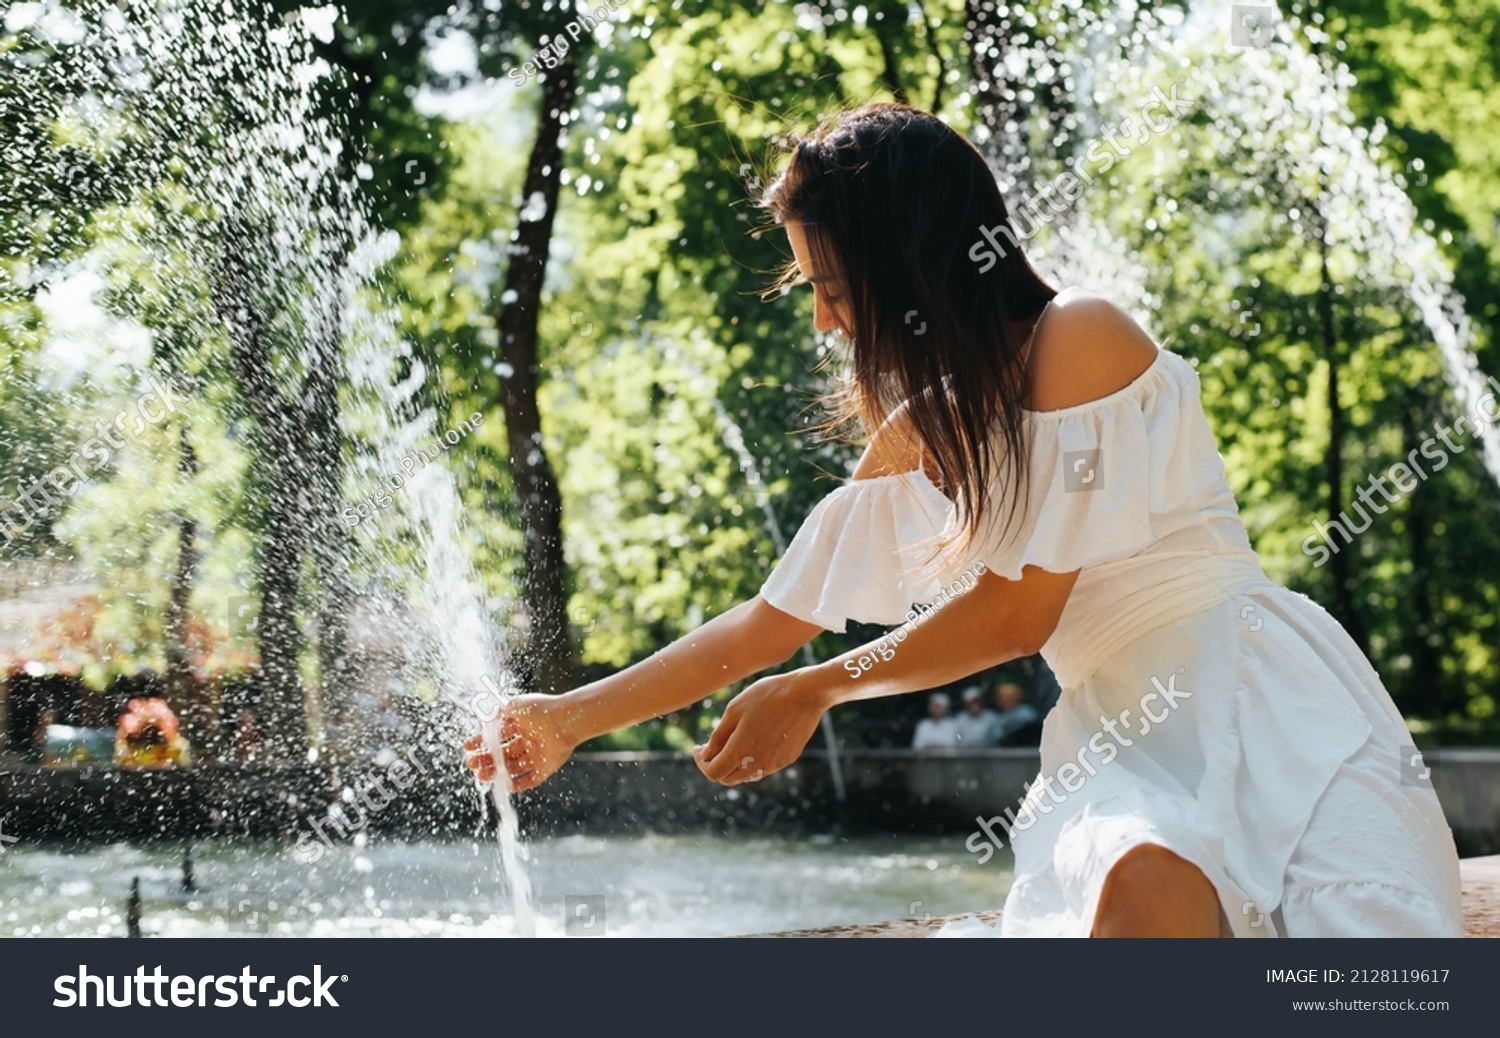 Young mixed race woman in white summer dress sitting by fountain on sunny day in park. Joyful positive woman cooling down by water on hot day outdoors. #2128119617